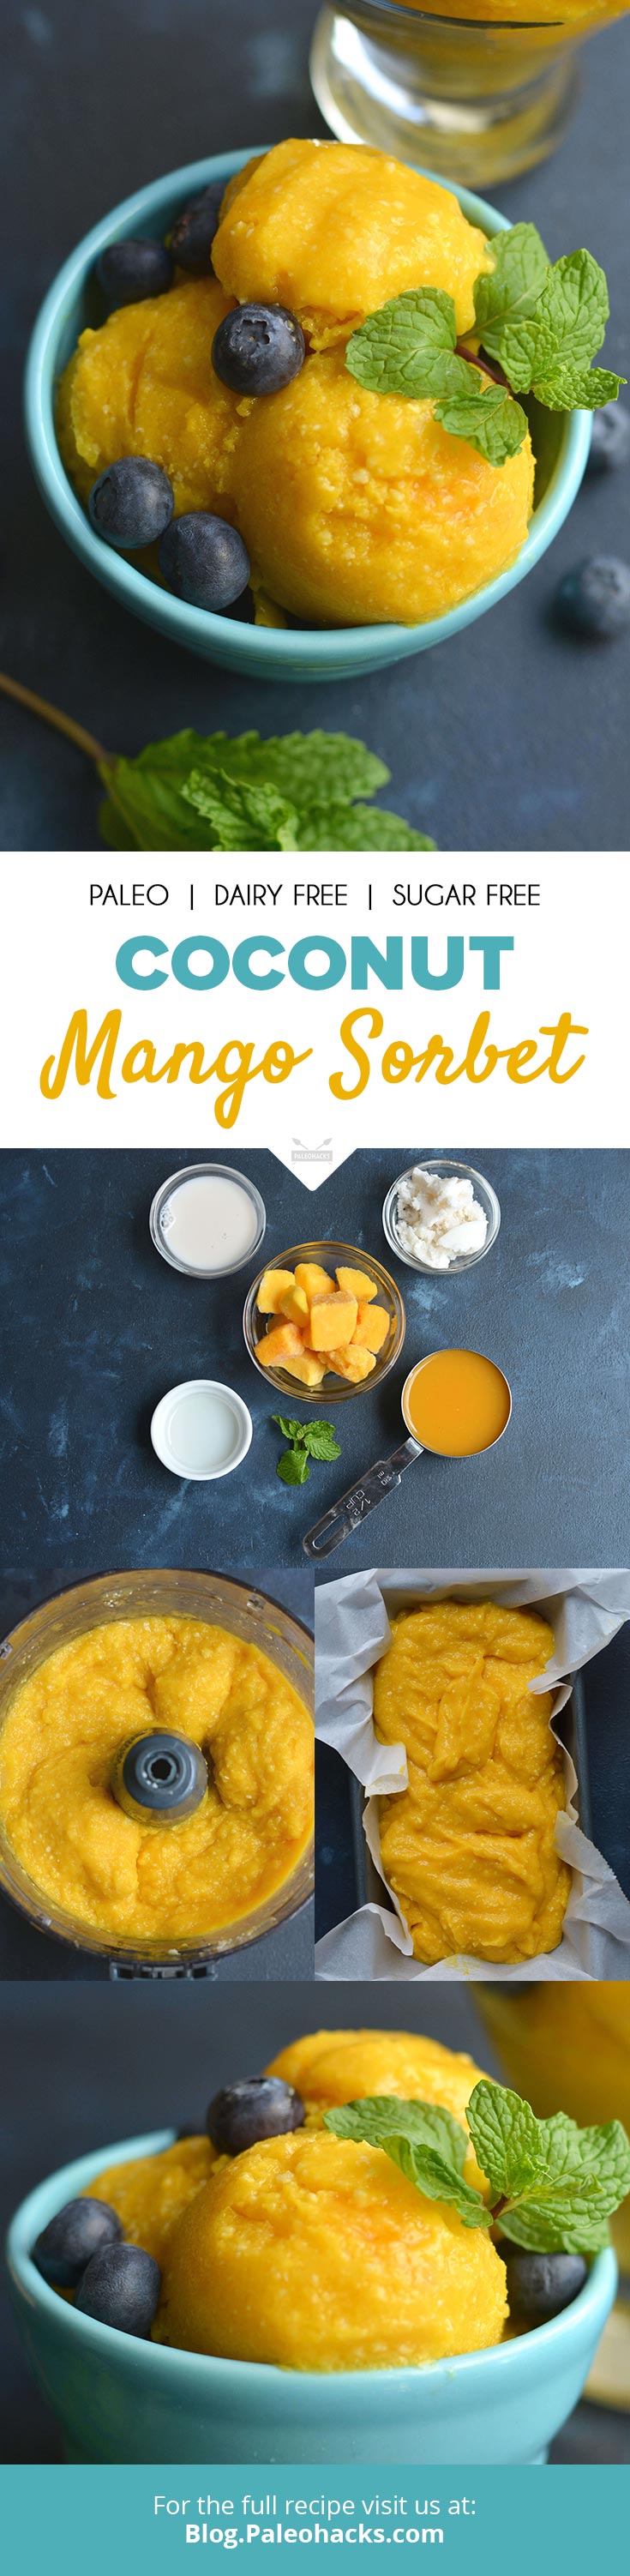 Made with mangoes, coconut butter, orange juice and coconut milk, this thick and creamy Coconut Mango Sorbet is slightly tart and perfectly sweet.